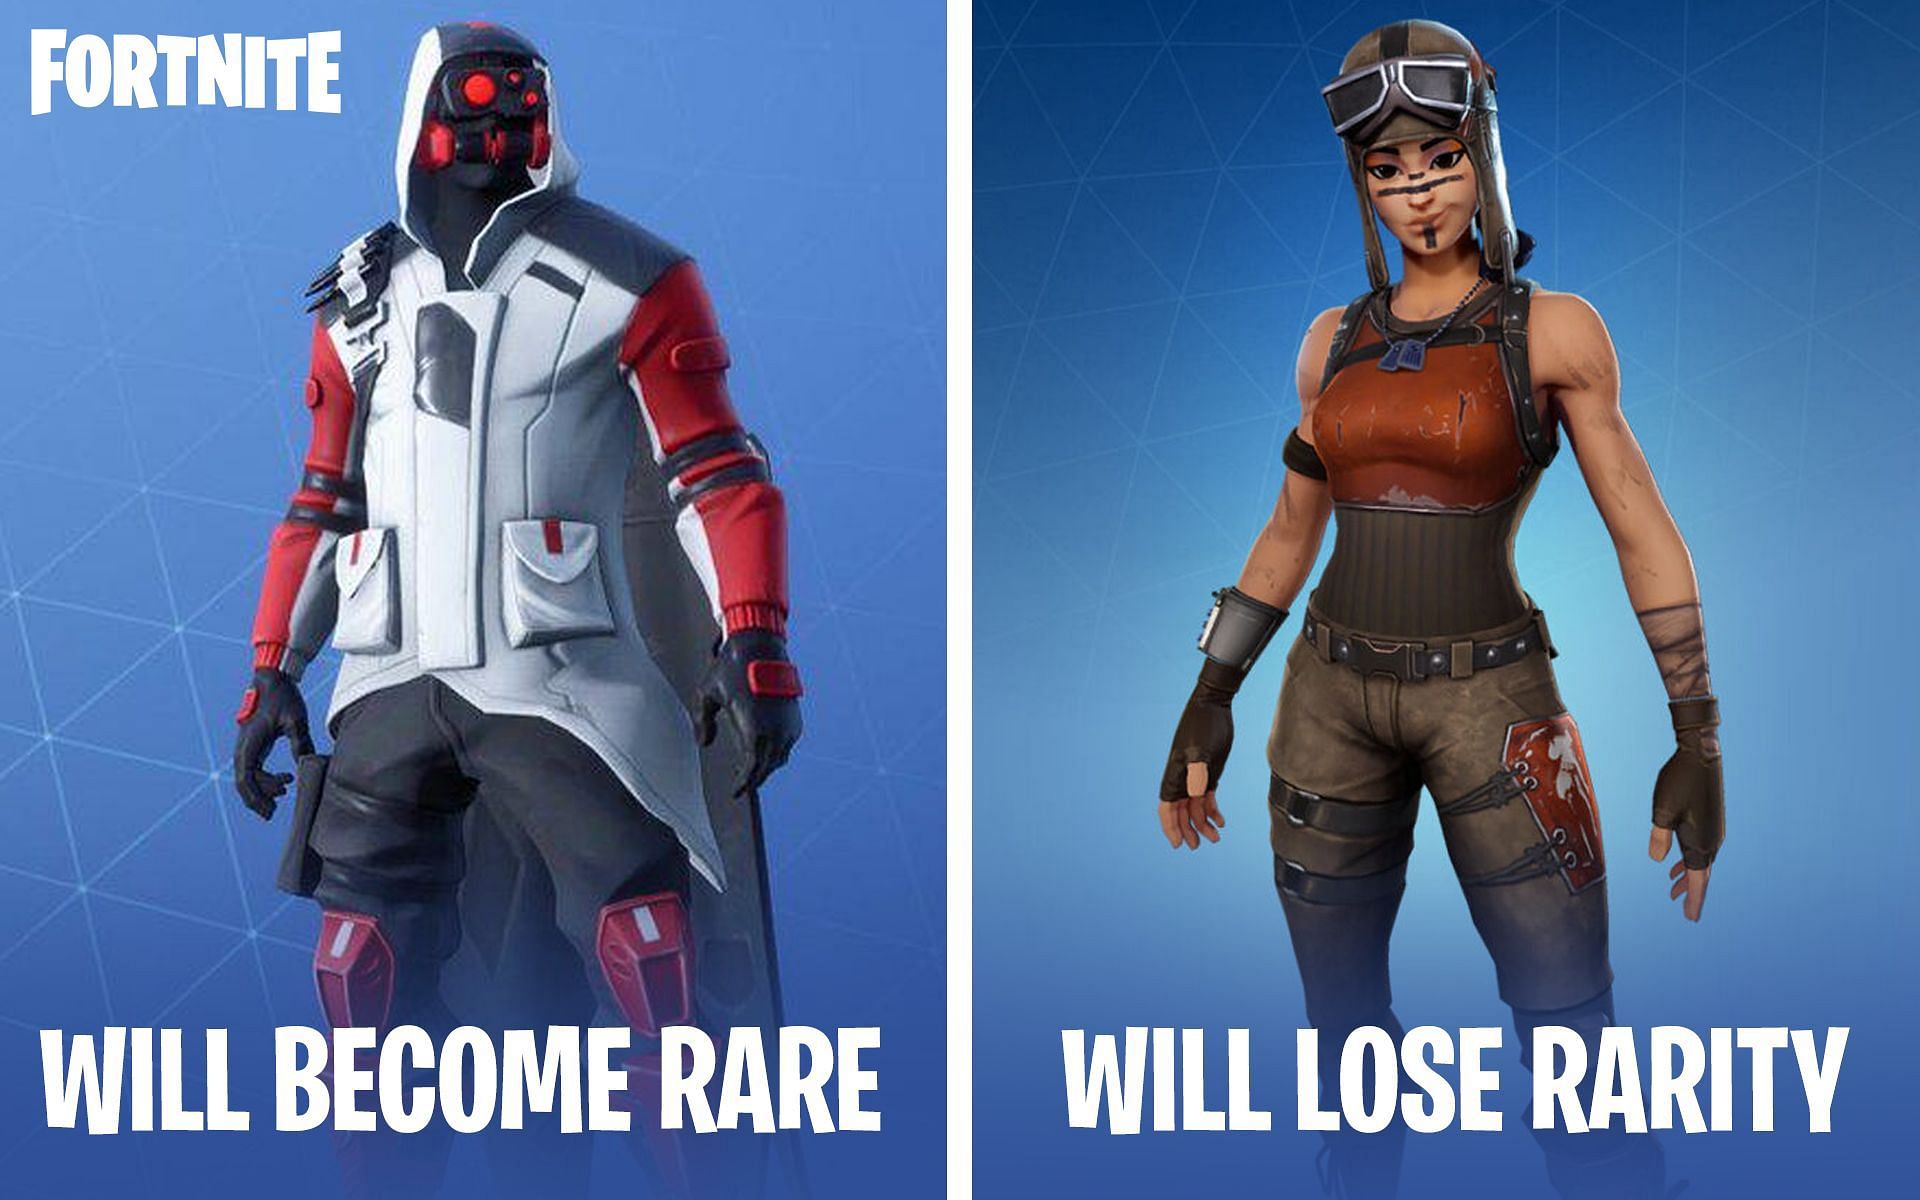 Double Helix and Renegade Raider outfits in Fortnite (Image via Sportskeeda)